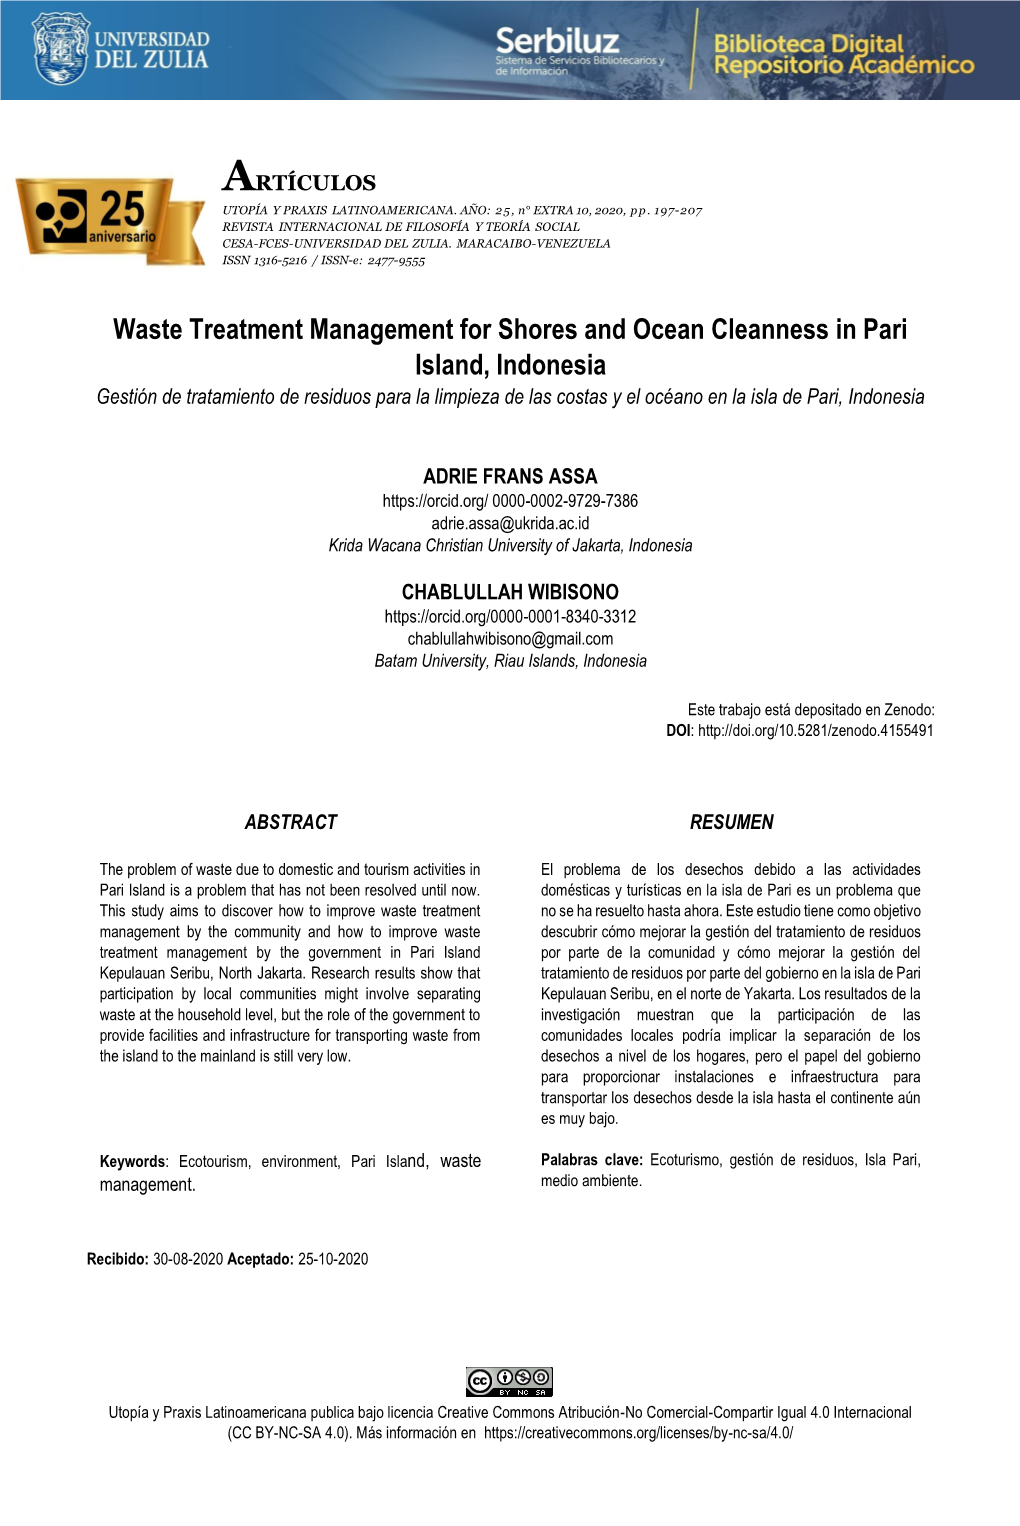 Waste Treatment Management for Shores and Ocean Cleanness In